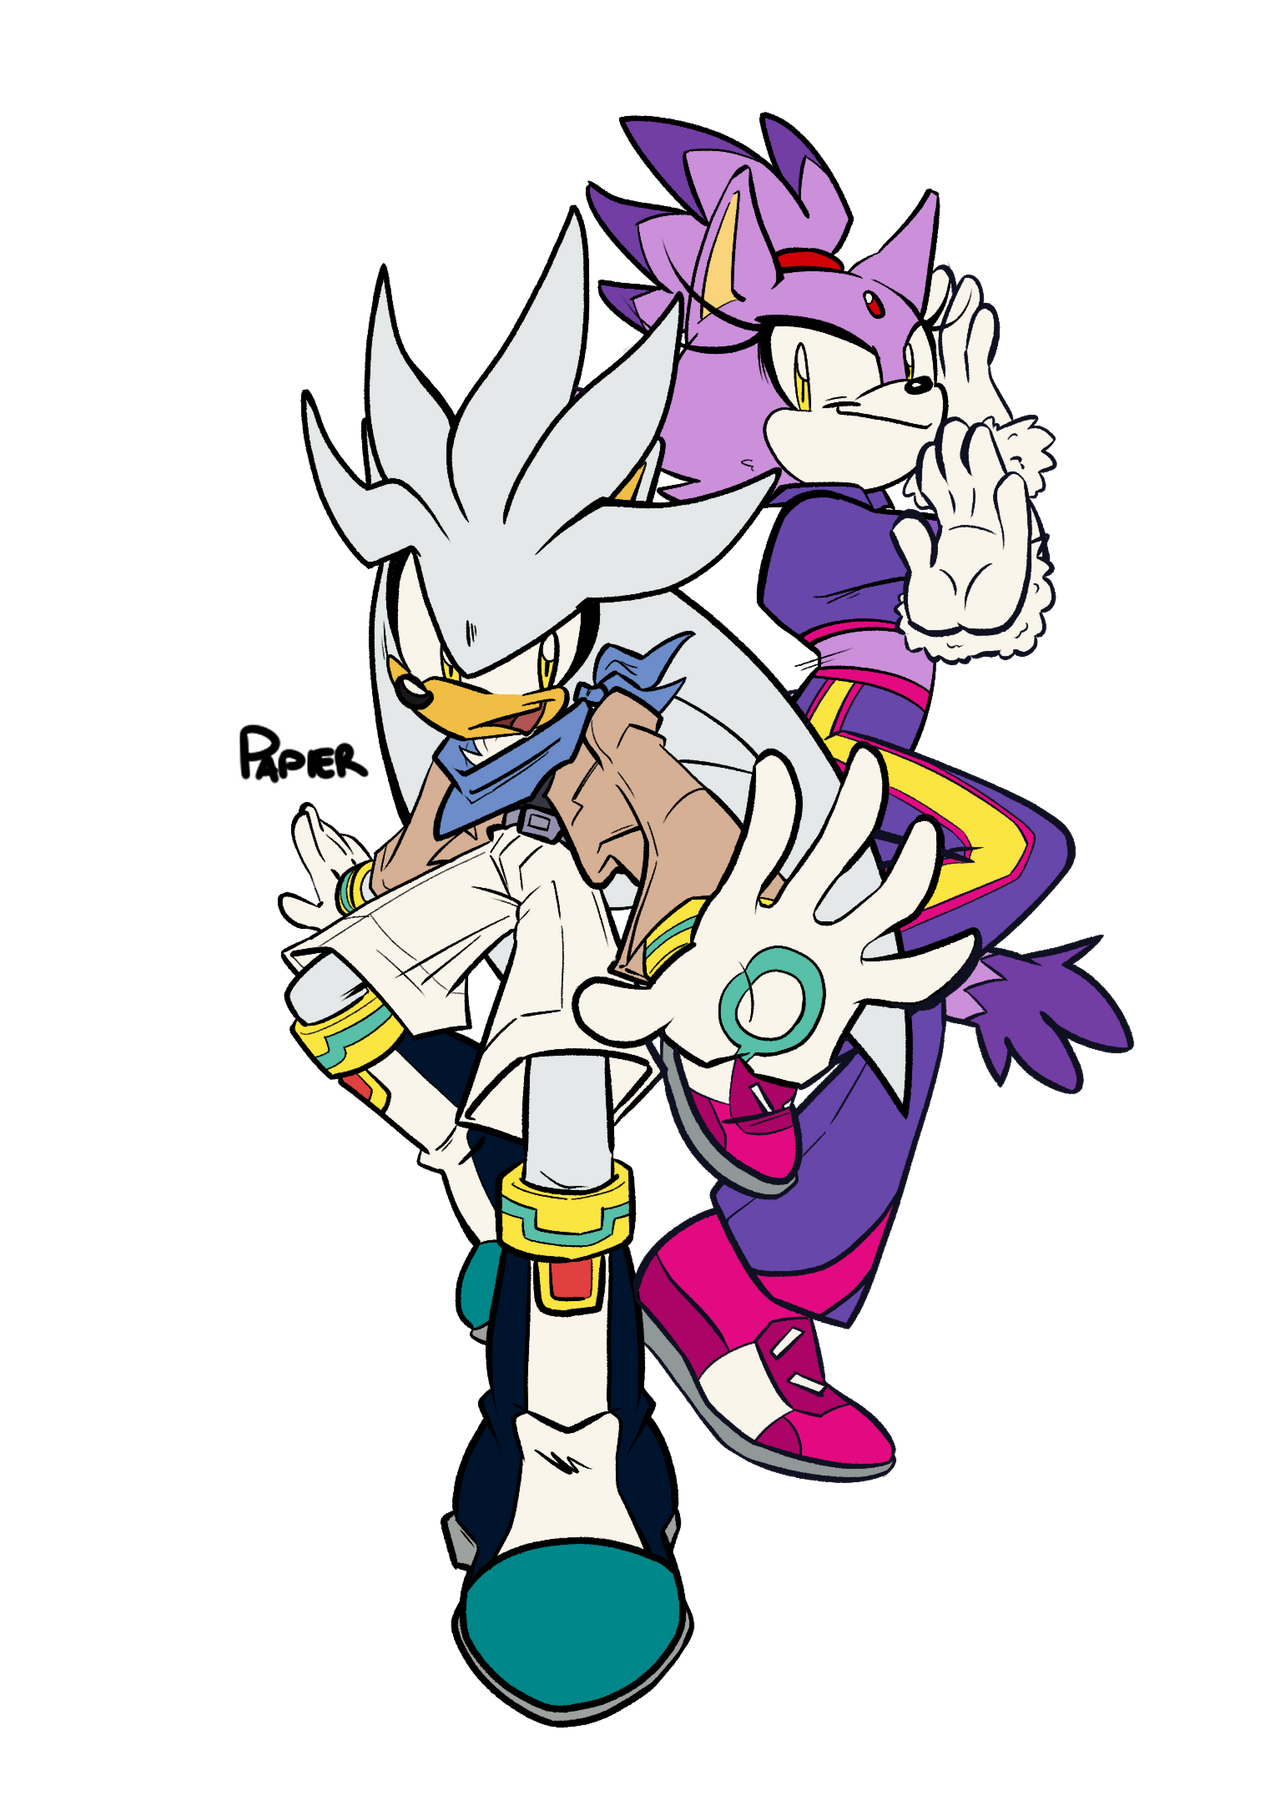 Silver and Blaze by TracingPapier by Tie-Rex1000000 on DeviantArt